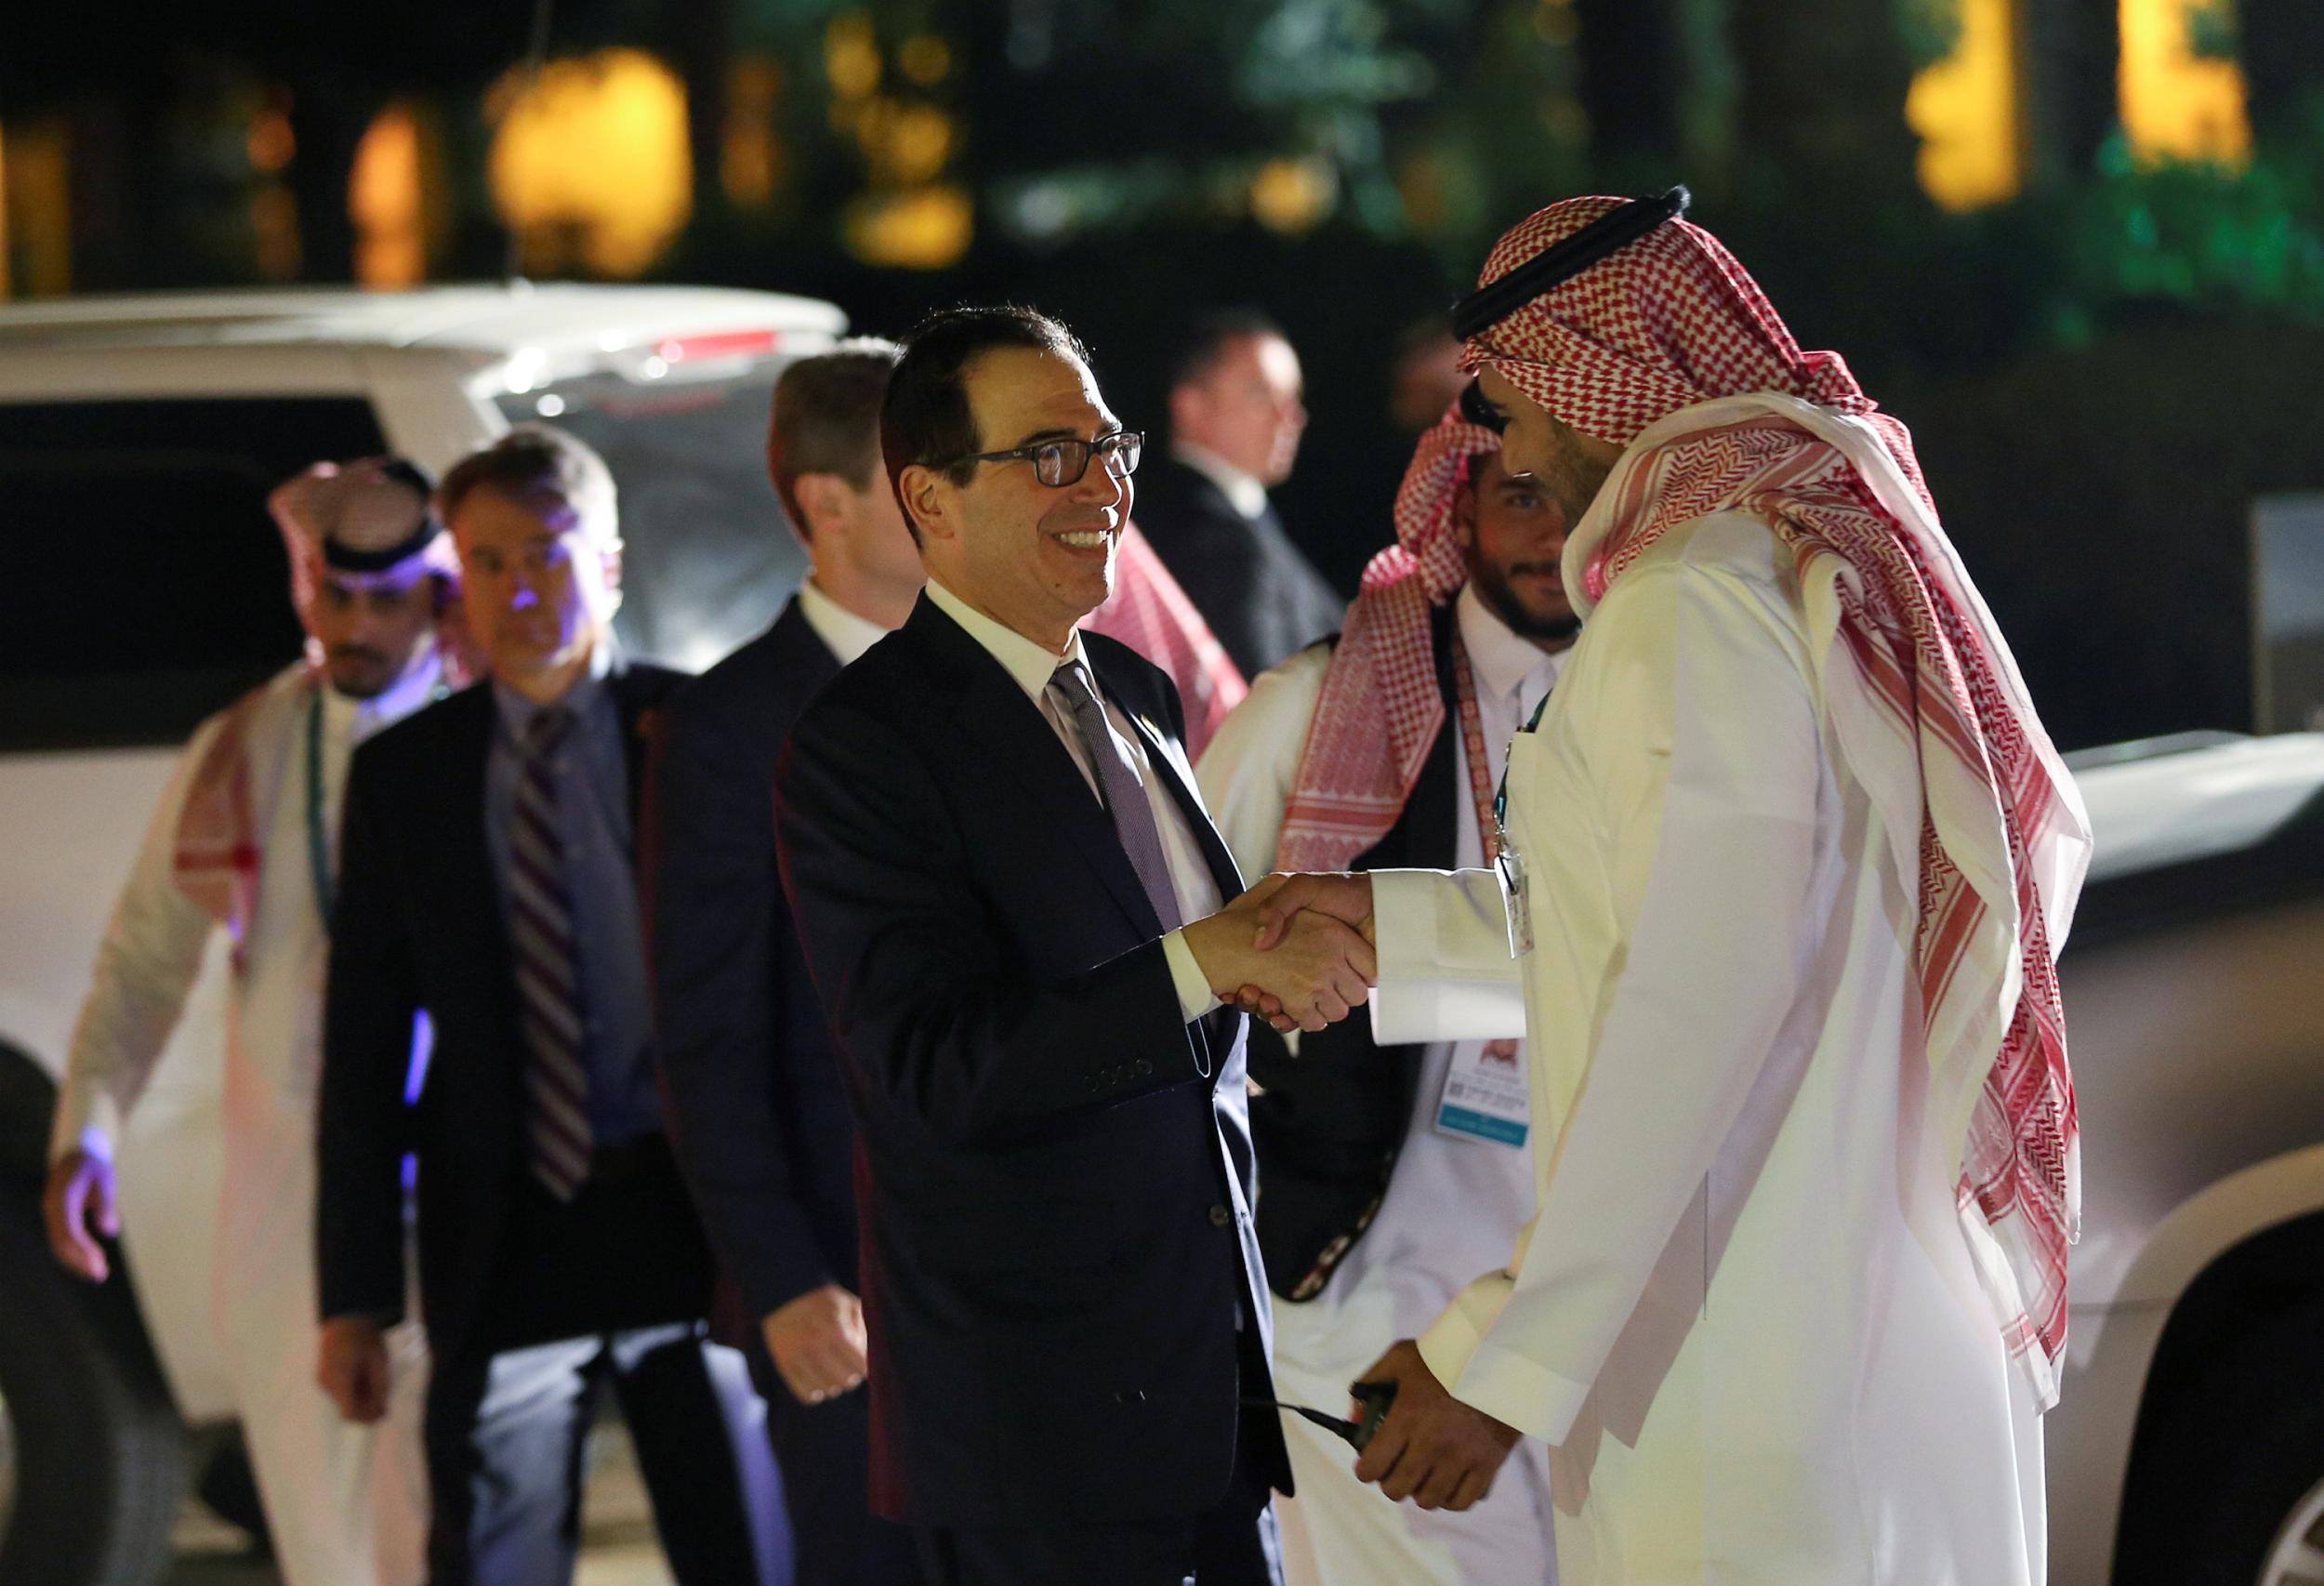 US Treasury Secretary Steven Mnuchin arrives for a welcome dinner at Saudi Arabia Murabba Palace, during the G20 meeting of finance ministers and central bank governors in Riyadh.